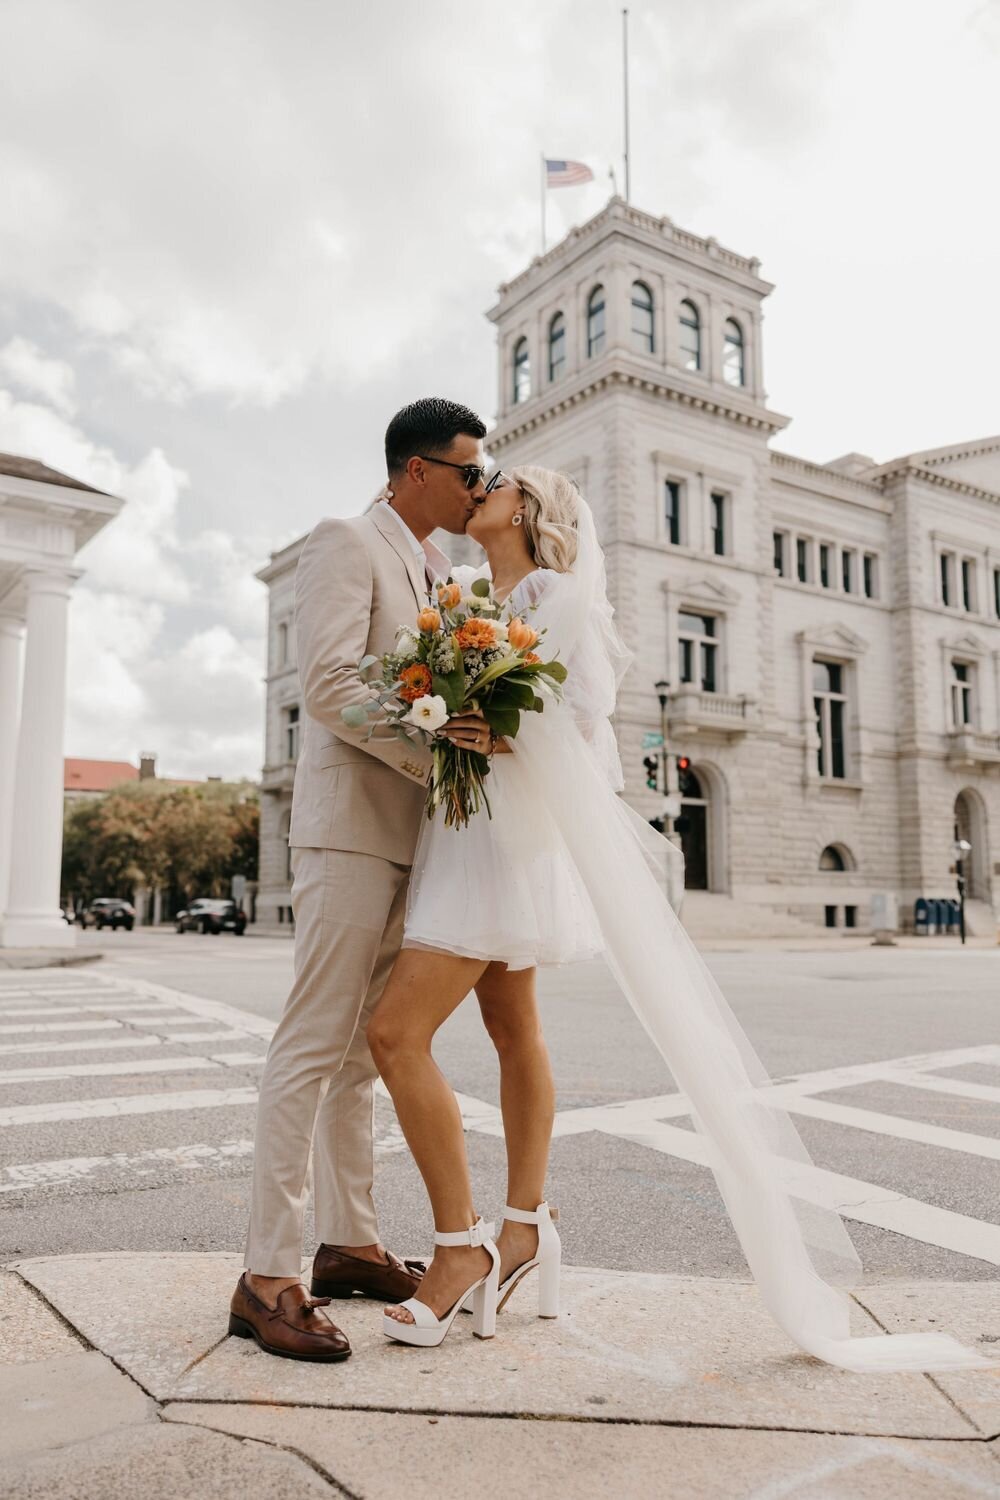 Raleigh wedding photographer capturing intimate moments